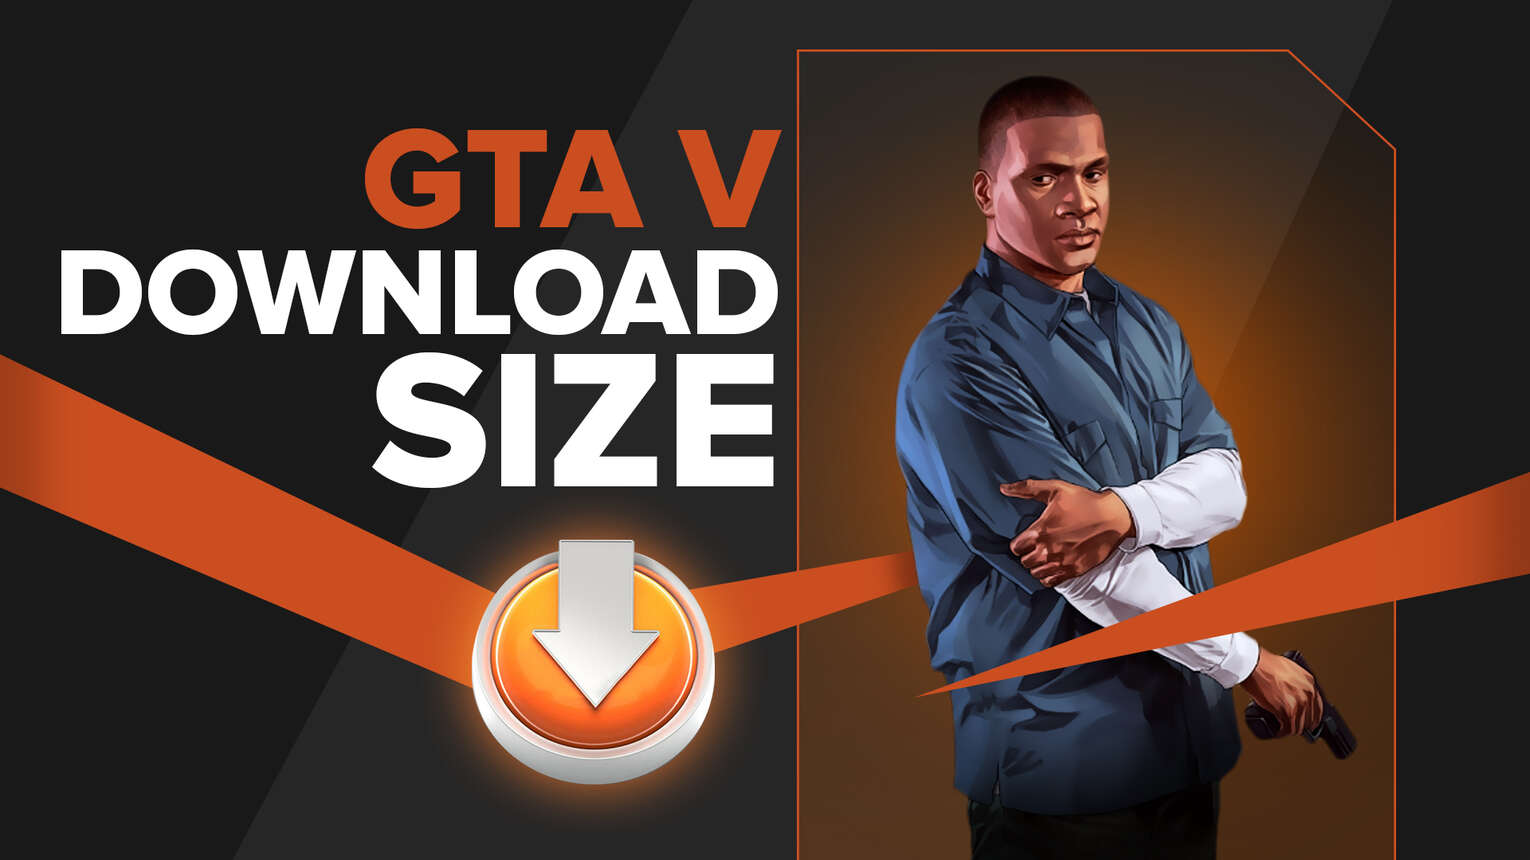 Check Out The Latest GTA V Download Size [All Platforms]